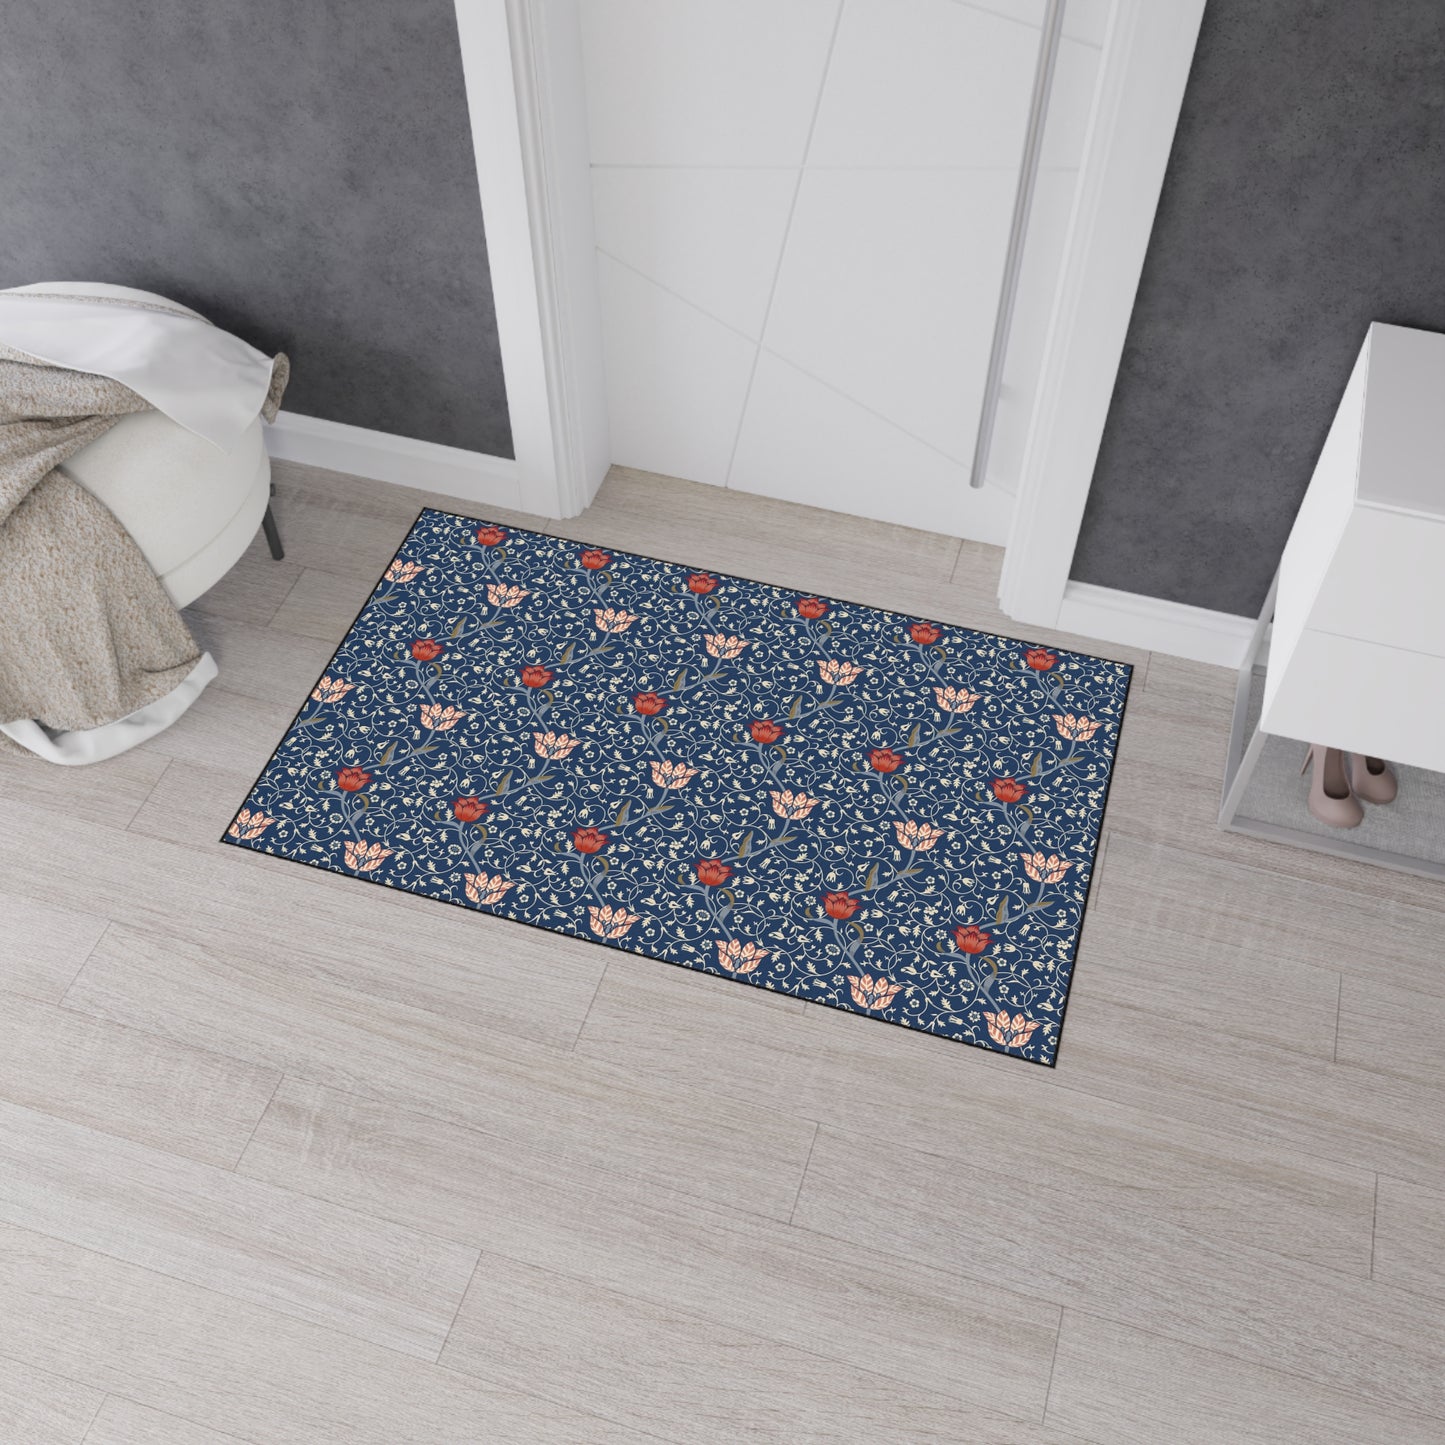 william-morris-co-heavy-duty-floor-mat-medway-collection-17